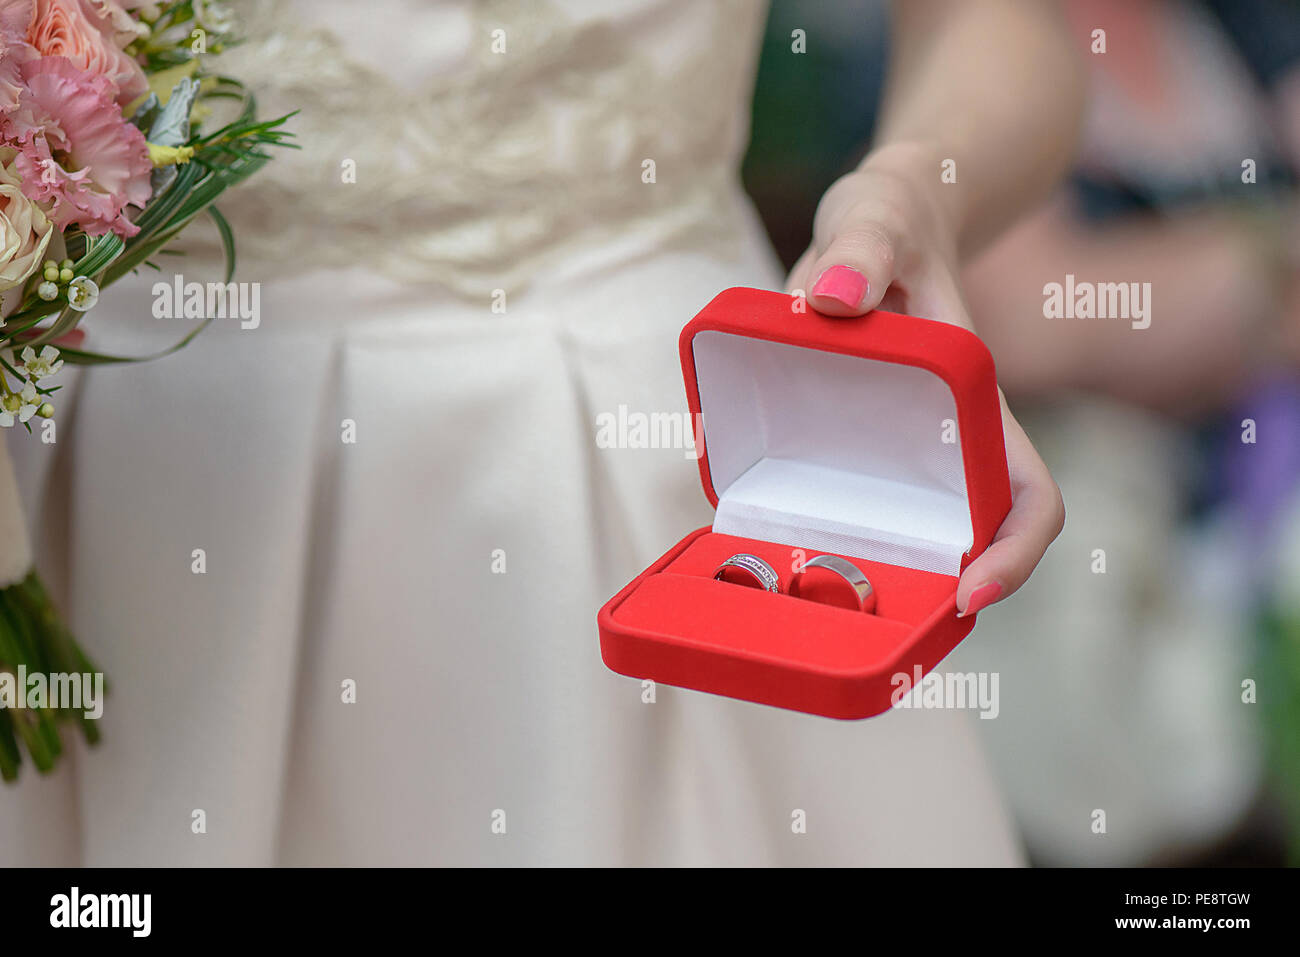 Cropped shot of Caucasian woman, holding a jewelry red box with matching silver or platinum wedding rings, in preparation for a wedding Stock Photo